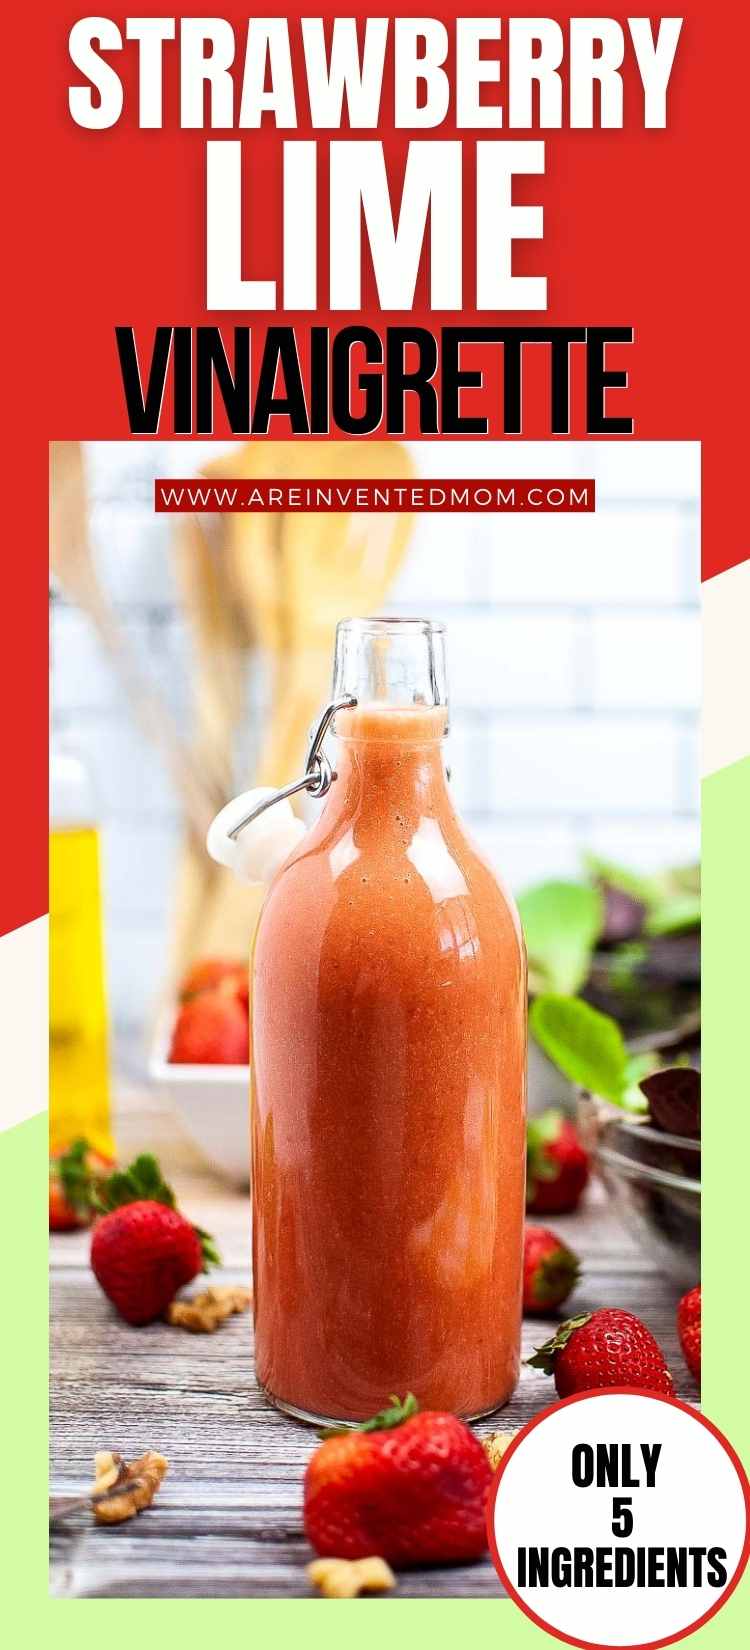 tall glass bottle of Strawberry Vinaigrette with lime next to strawberries